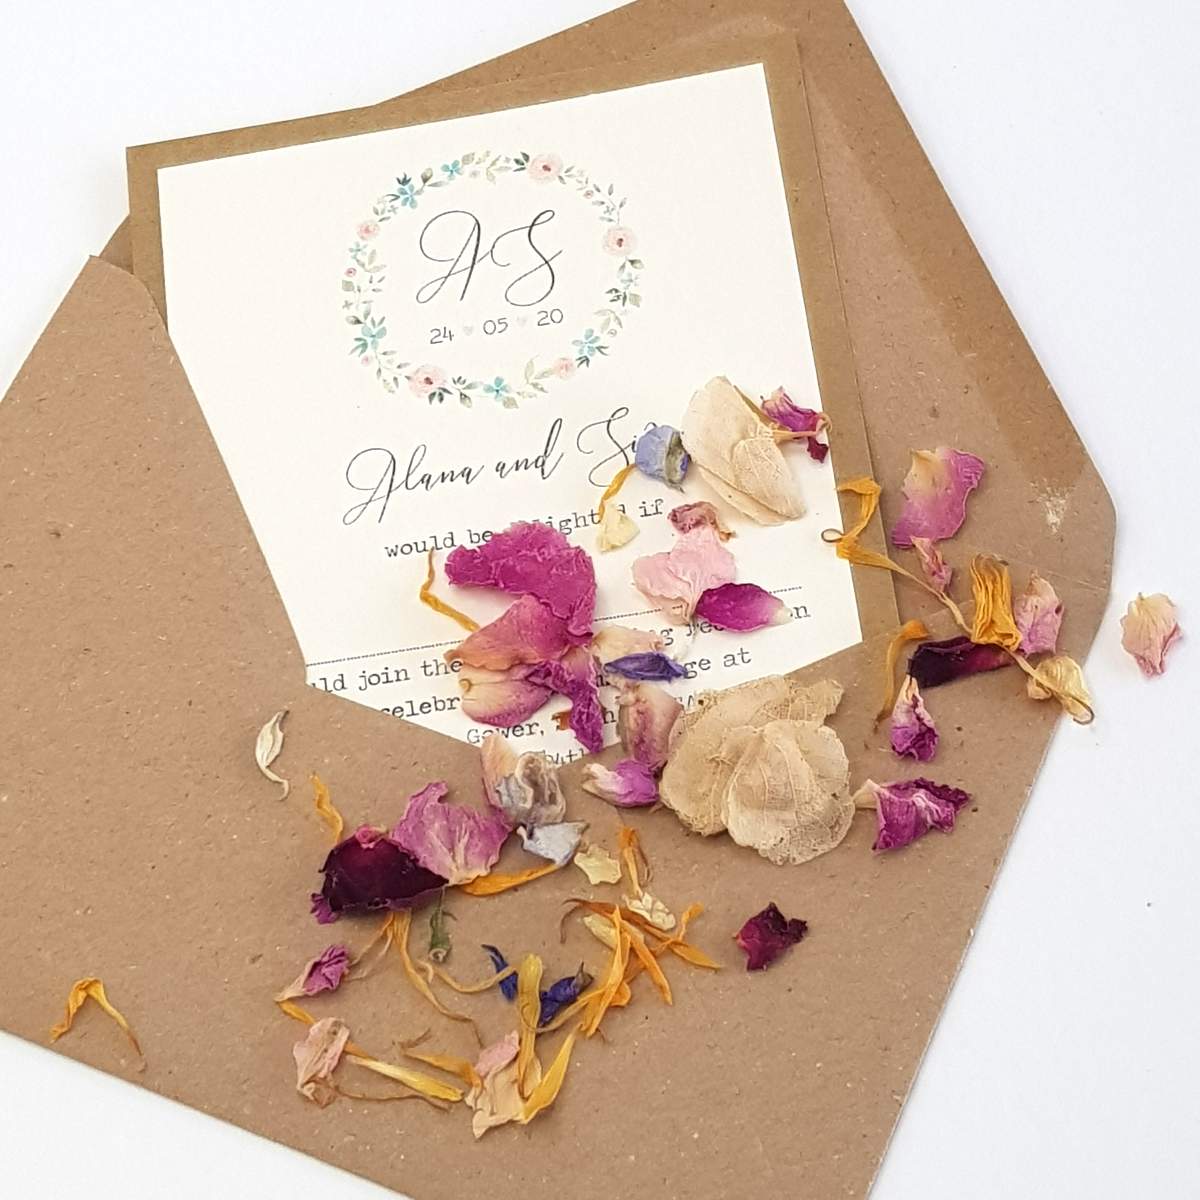 handmade rustic wedding invitation with flowers, a rustic recycled kraft envelope, sprinkled with colourful natural dried flower petal biodegradable confetti